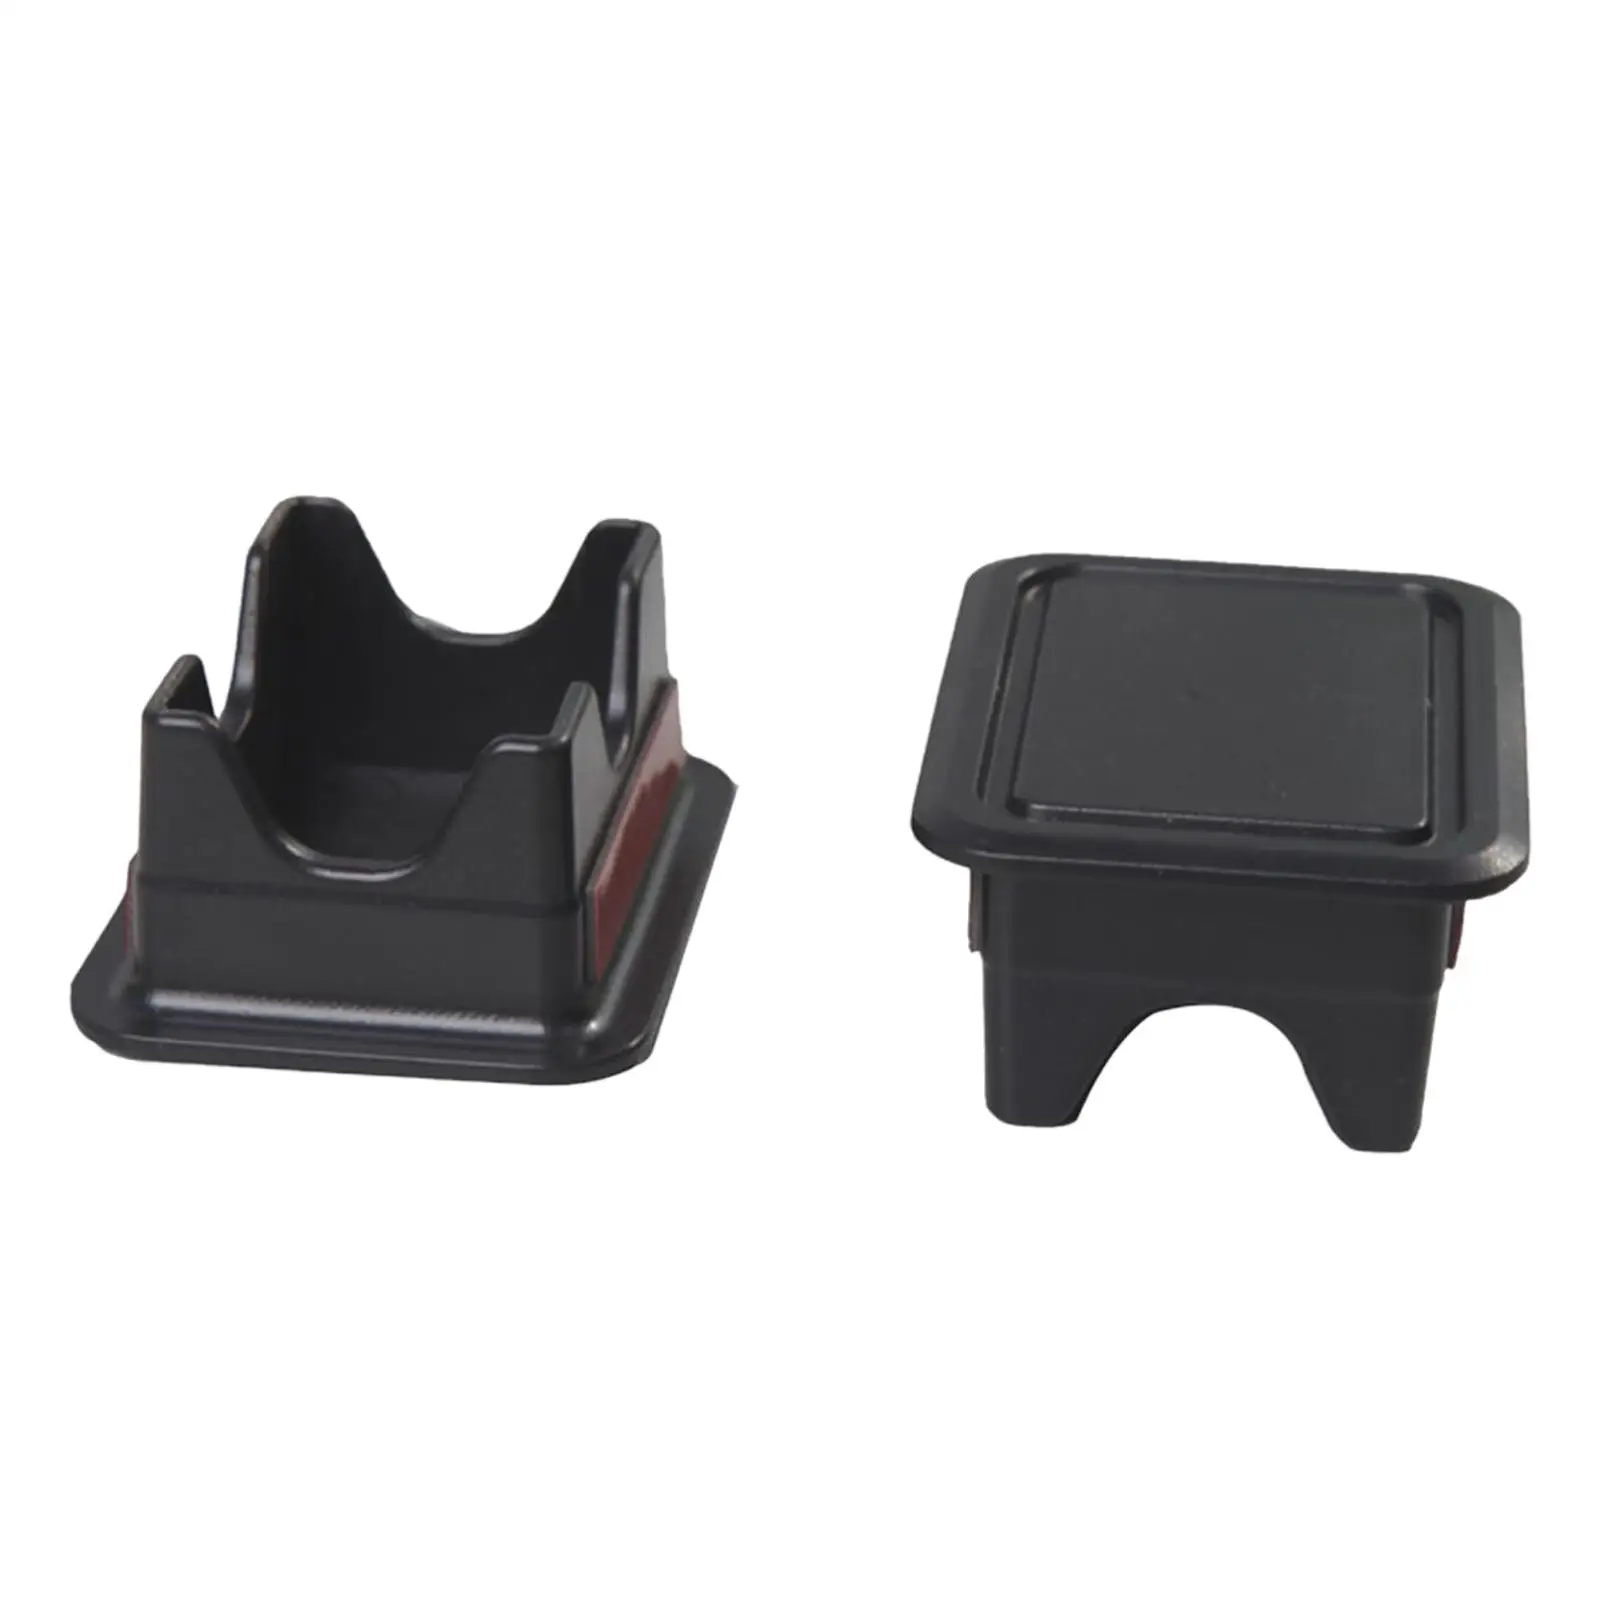 2 Pieces Vehicle Truck Stake Pocket Covers for  RAM 1500 2500